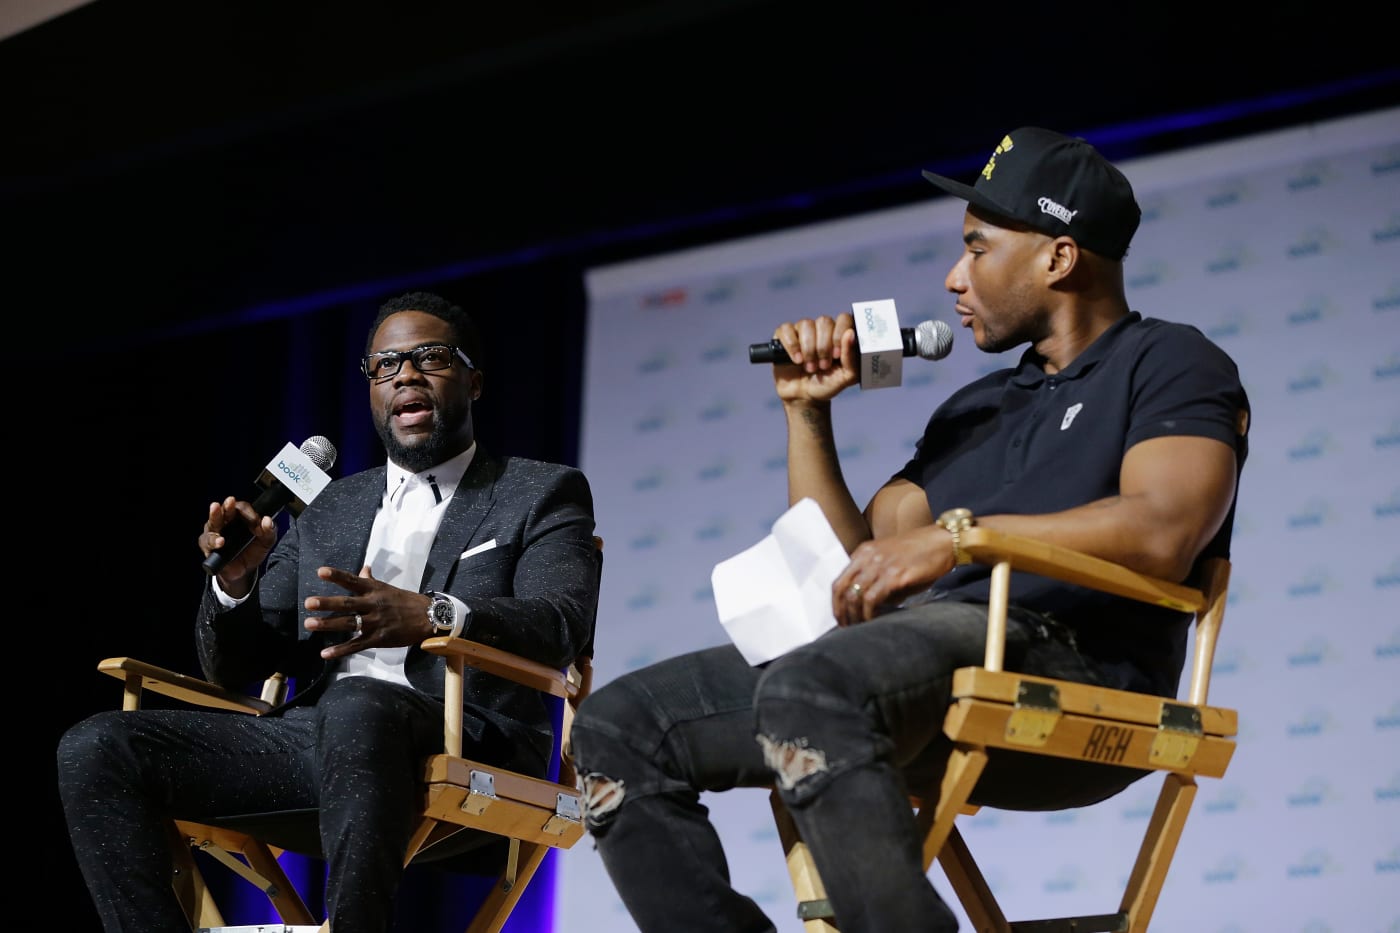 kevin hart and charlemagn tha god at book con promoting partnership